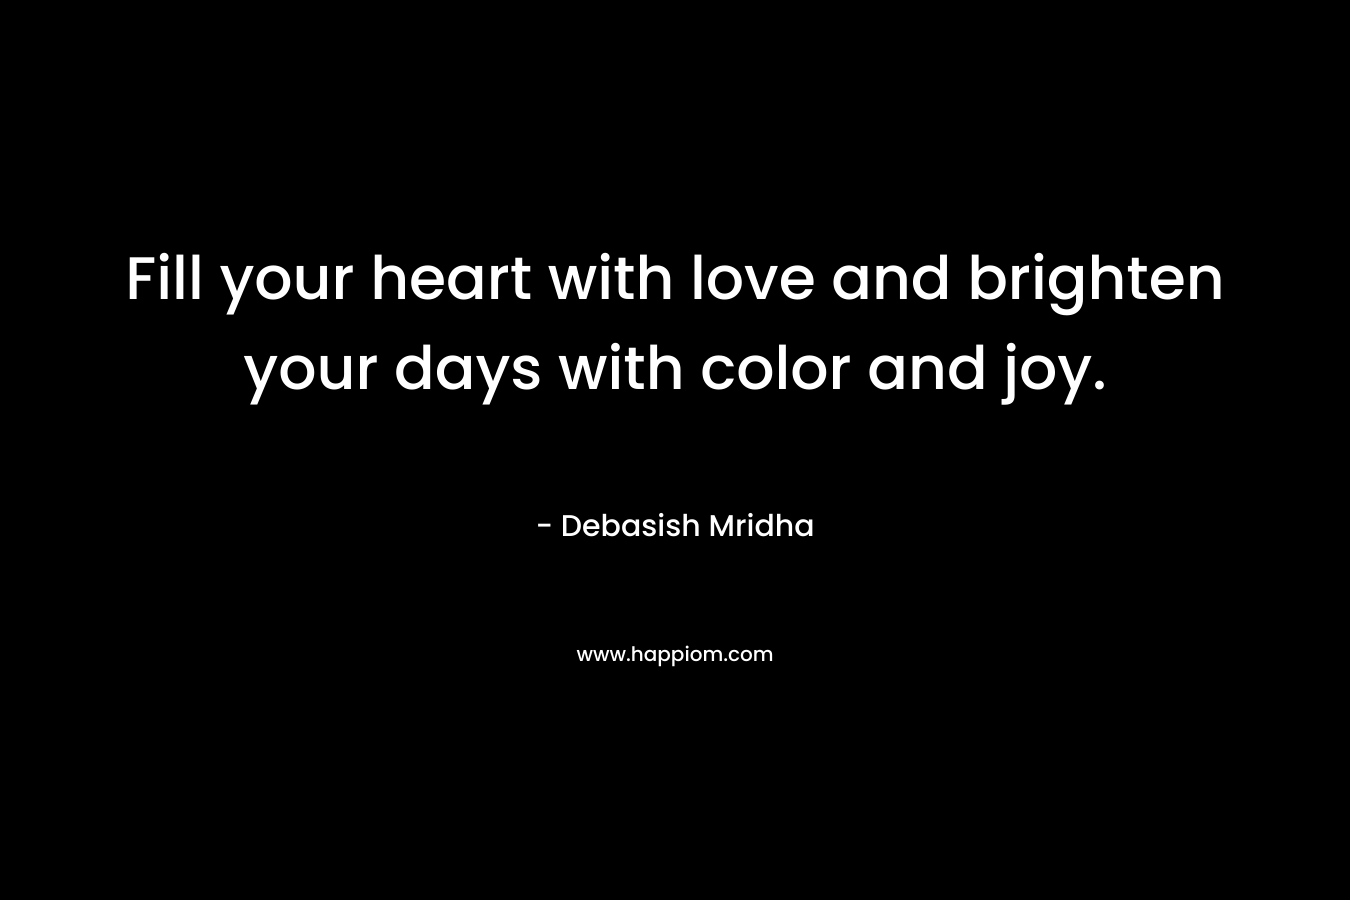 Fill your heart with love and brighten your days with color and joy.